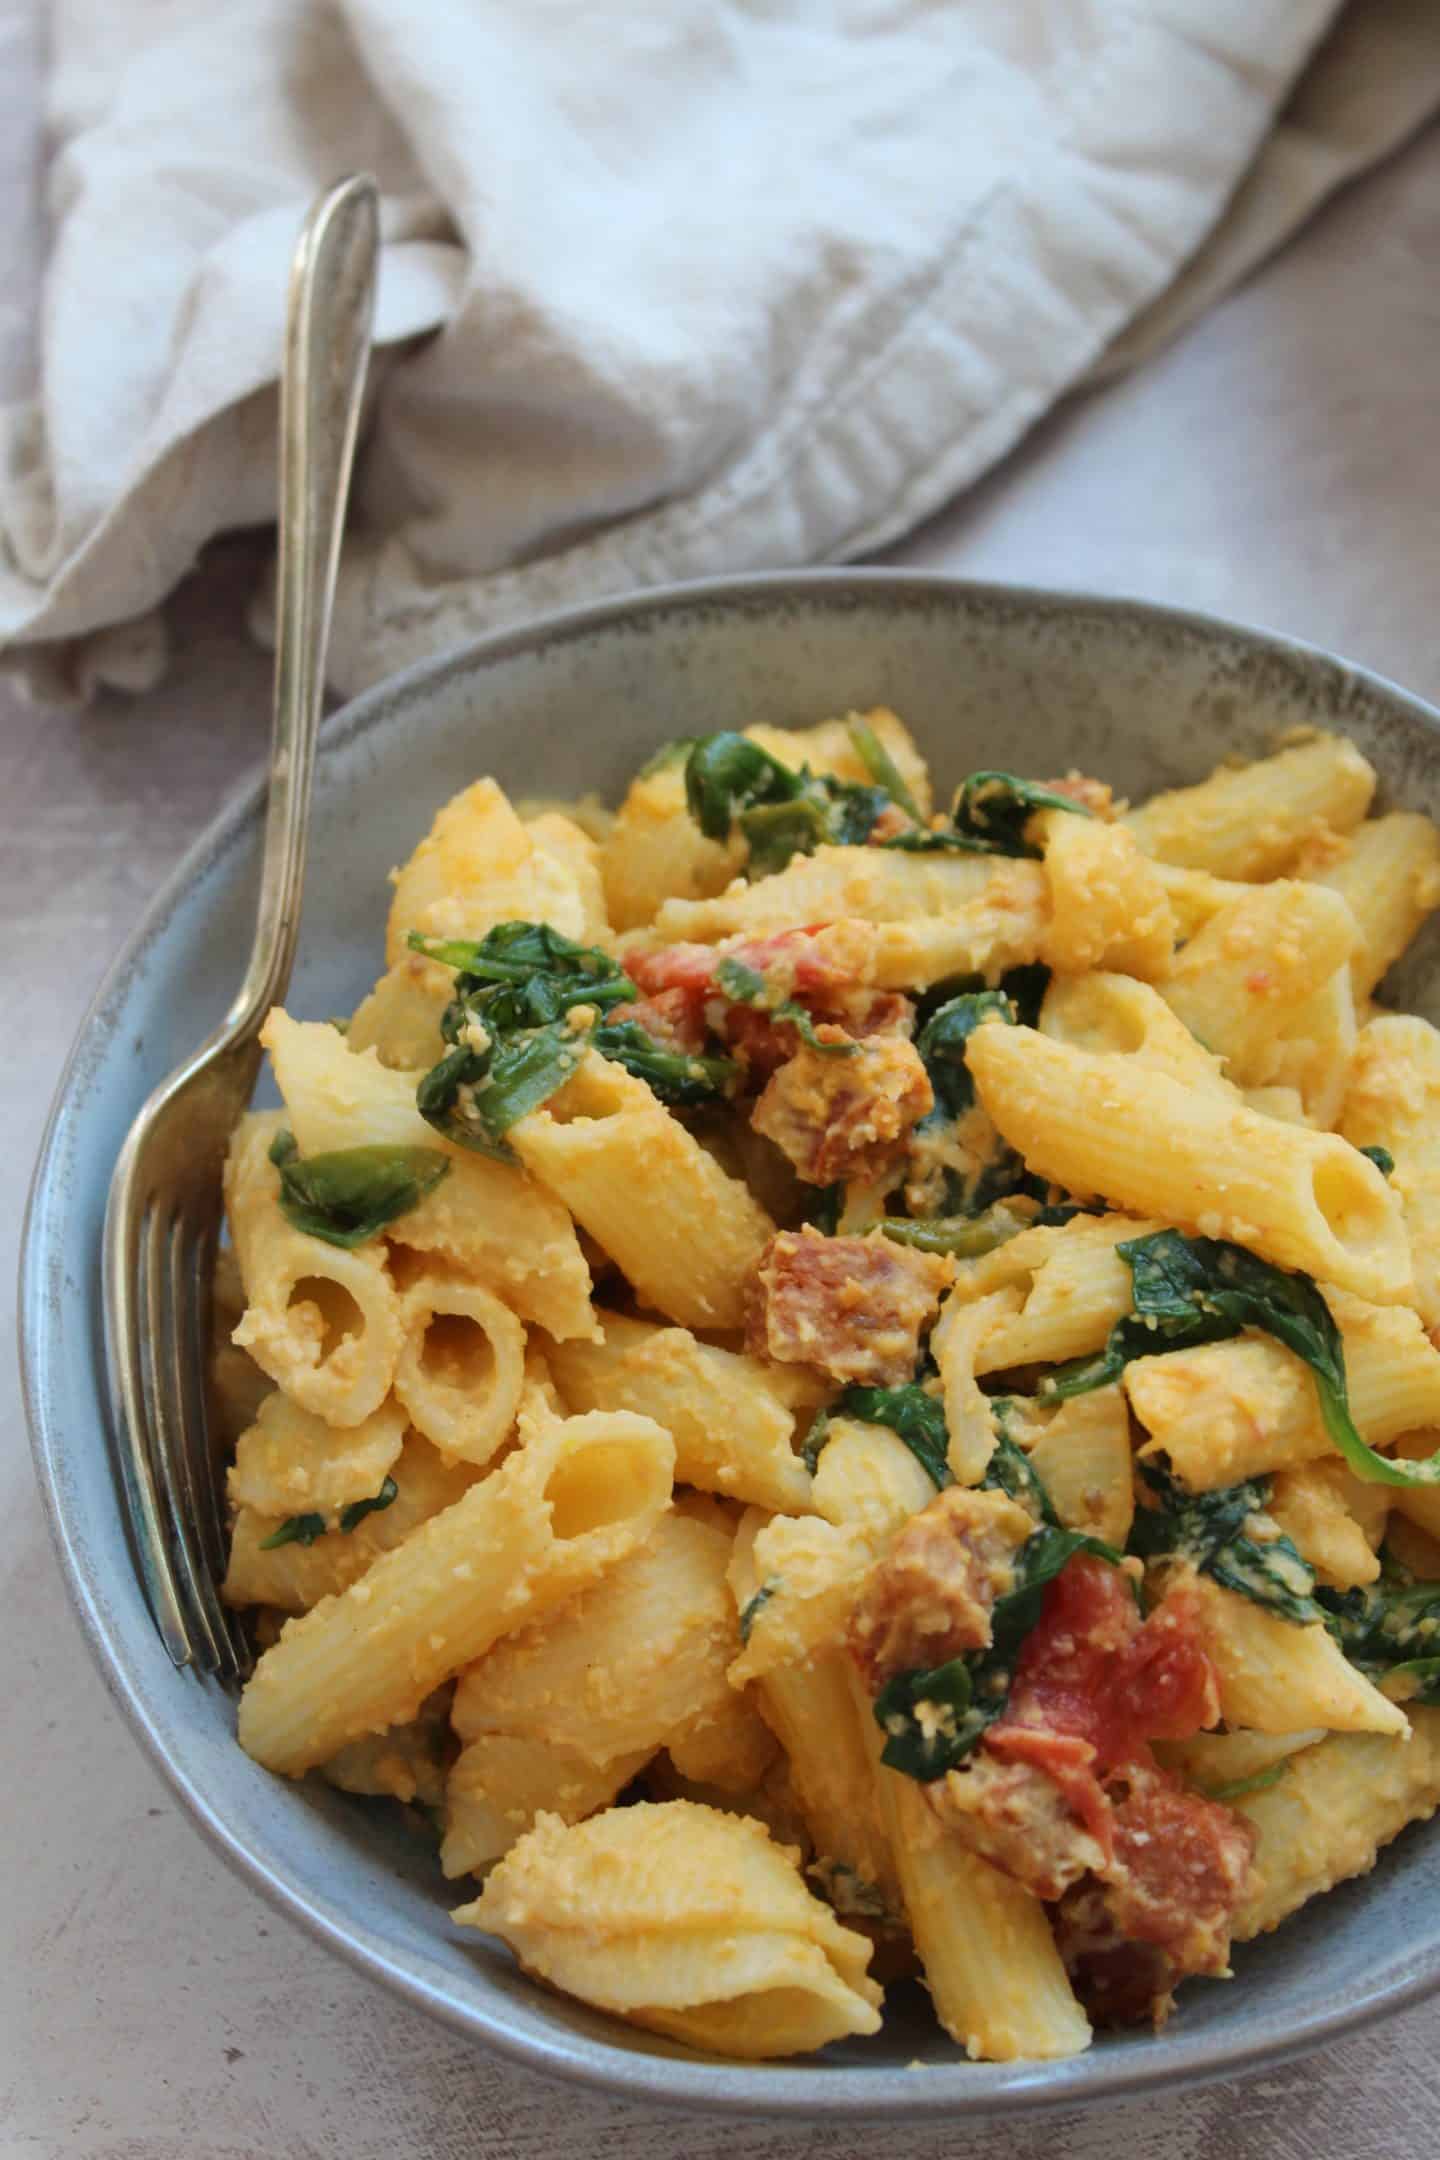 gluten free pasta recipe with houmous chorizo tomato and spinach - no cook sauce summer dinner idea (2)